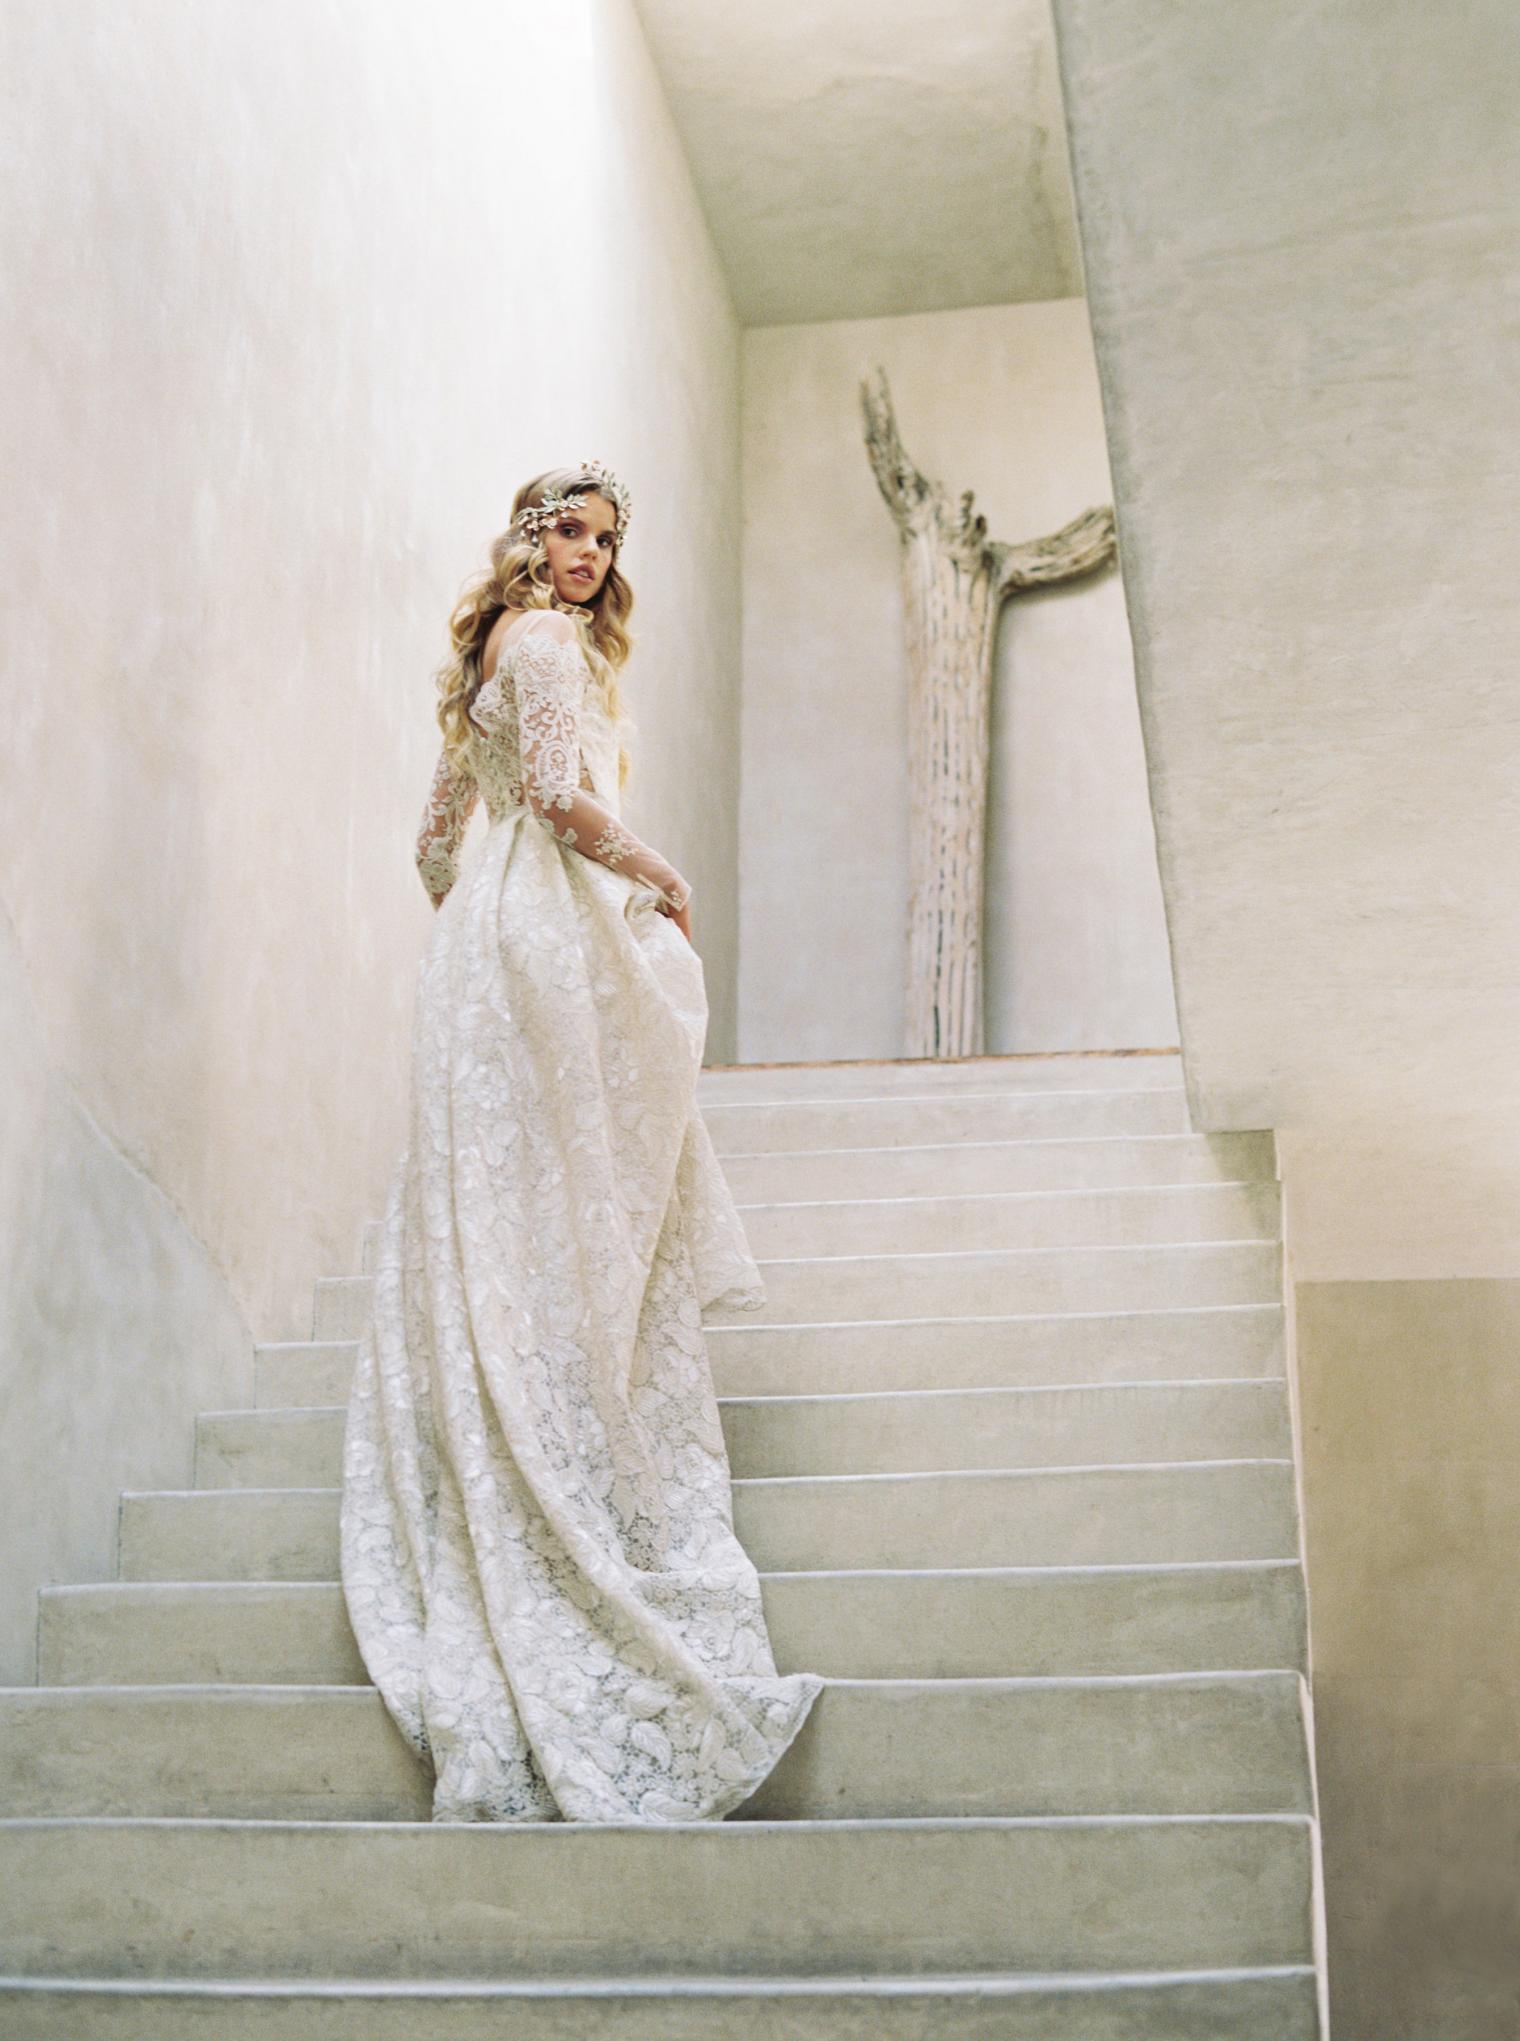 The Best Wedding Dress Boutiques & Salons in Los Angeles